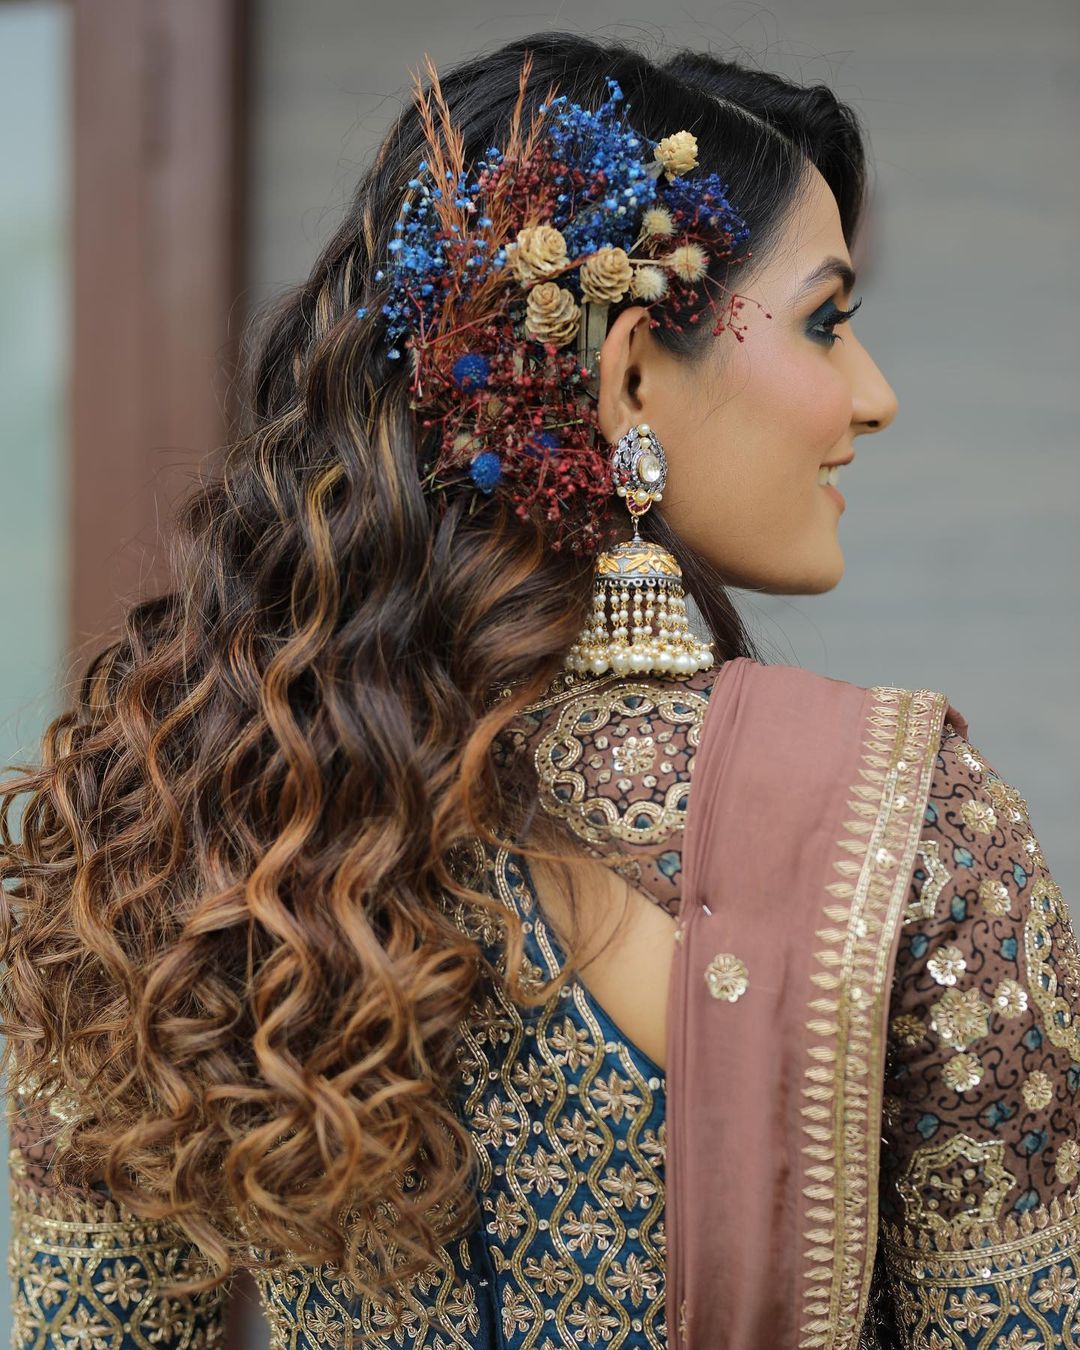 Top 5 hairstyles For An Indian Wedding